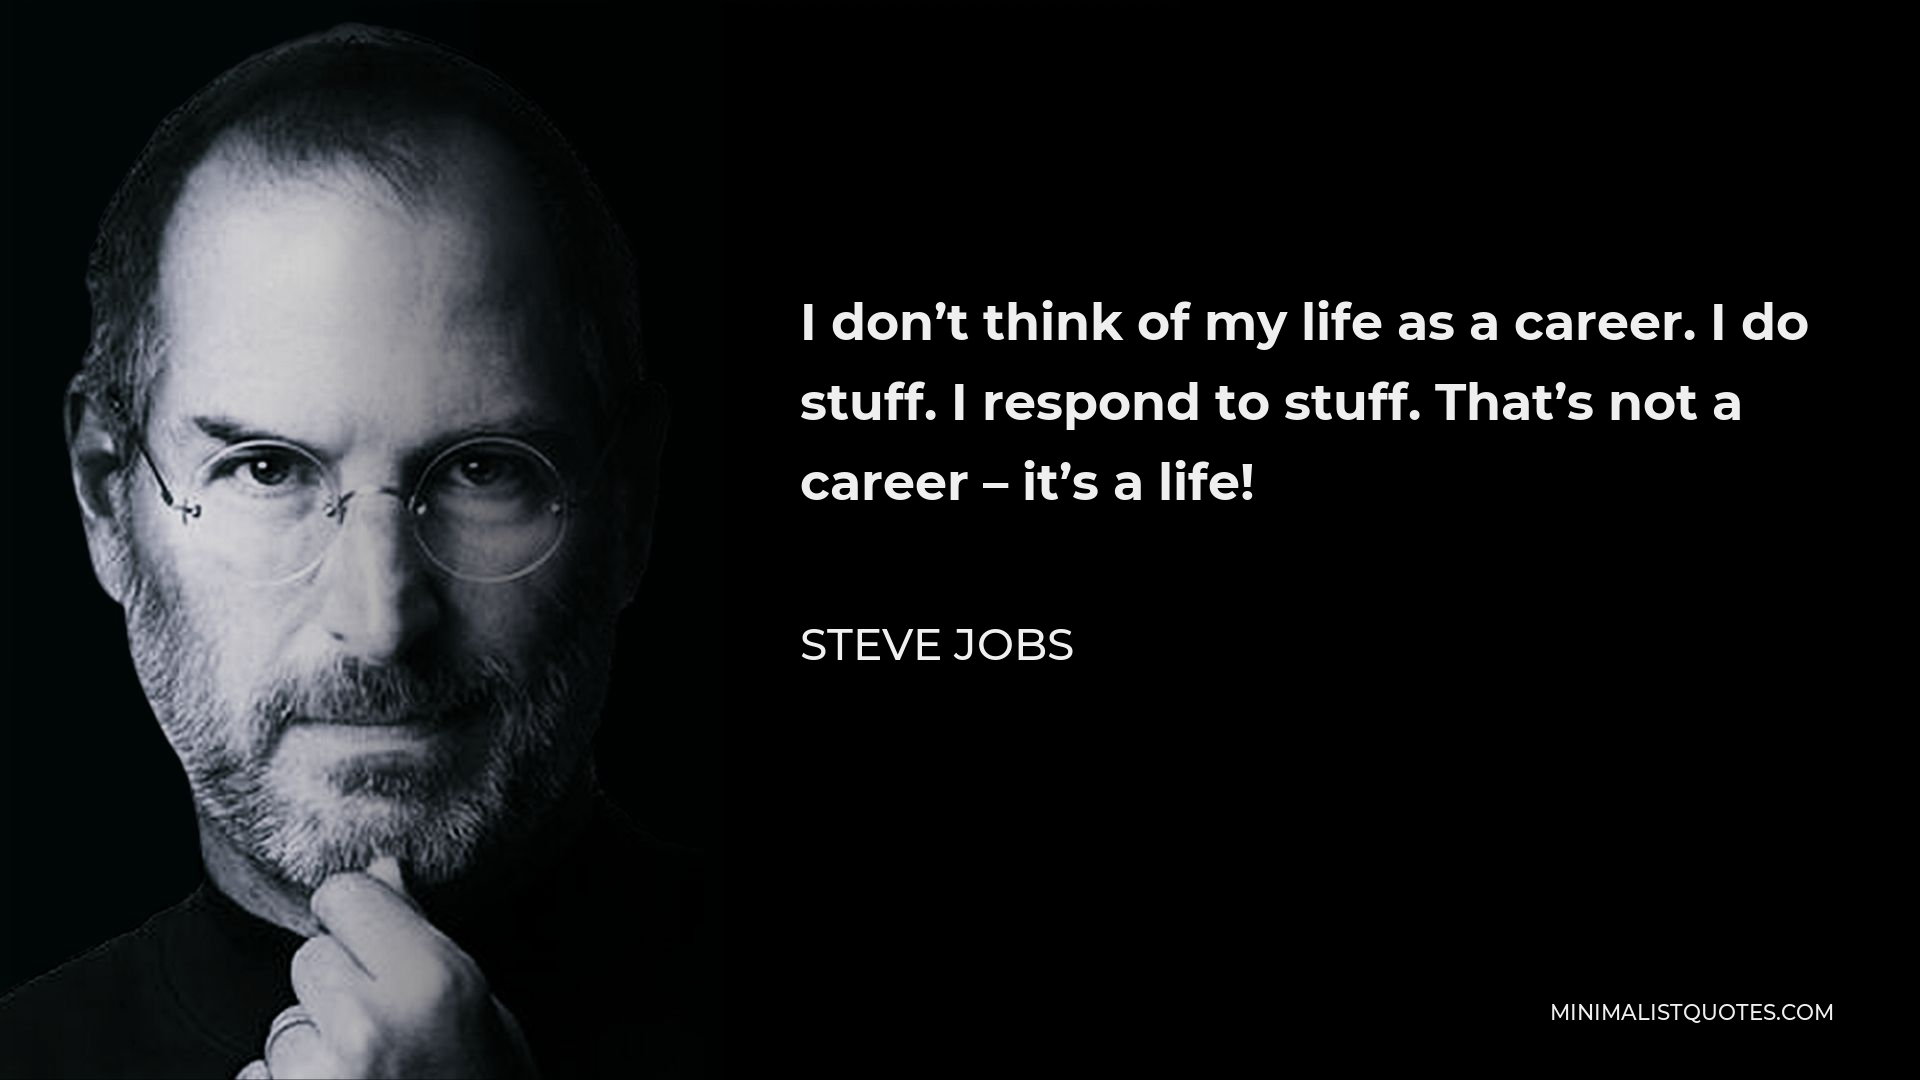 Steve Jobs Quote - I don’t think of my life as a career. I do stuff. I respond to stuff. That’s not a career – it’s a life!